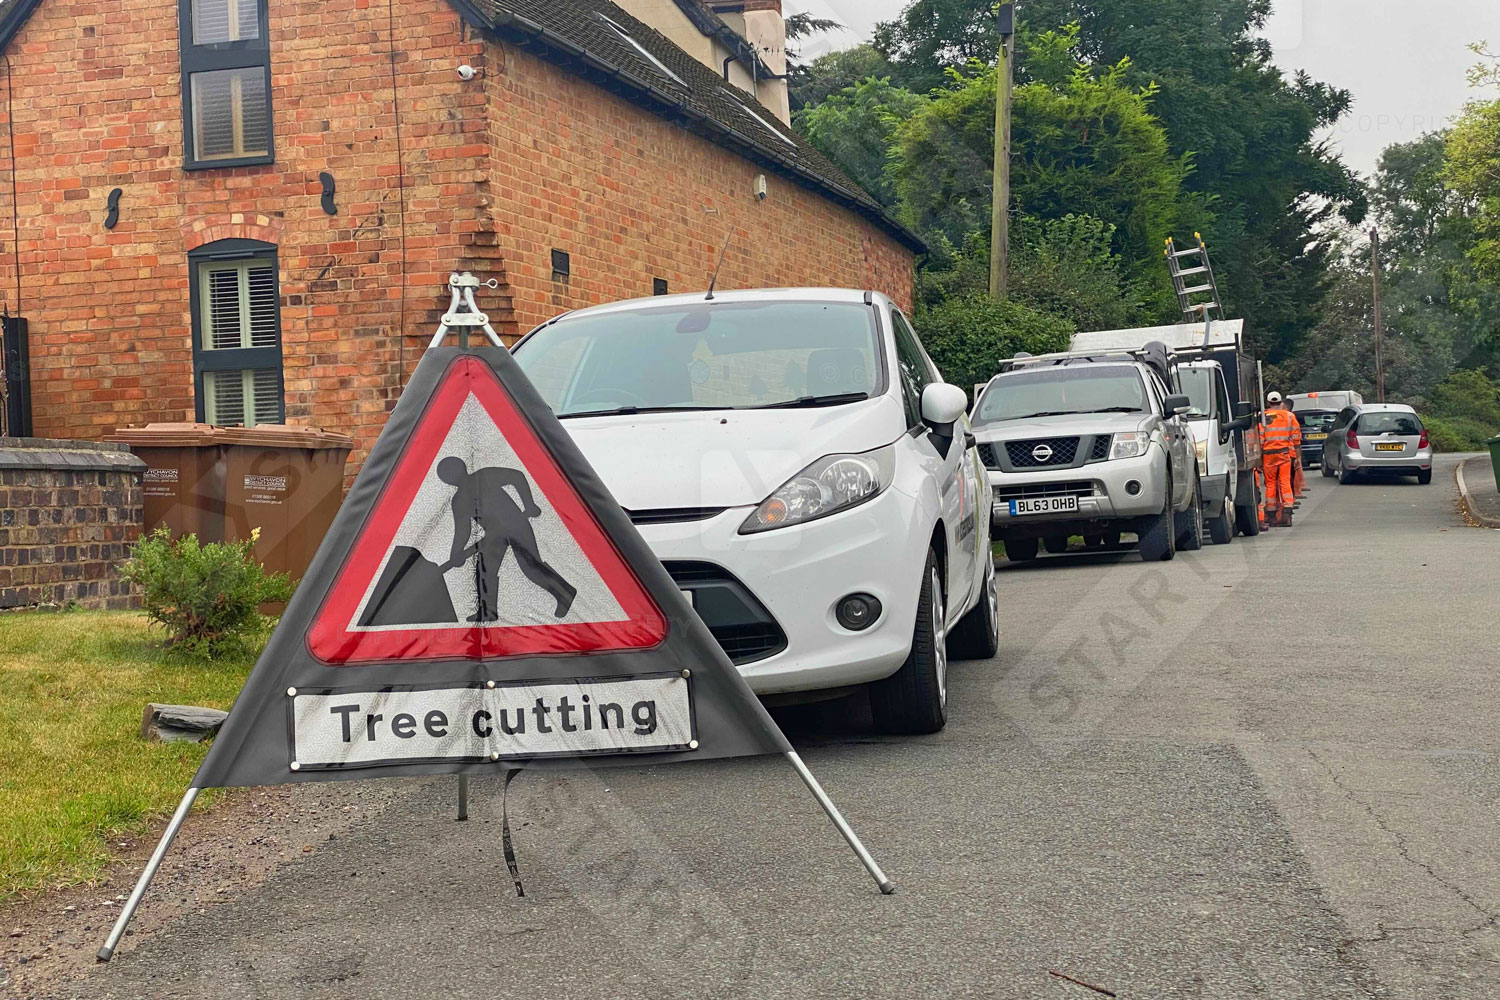 Tree cutting roll up sign in use